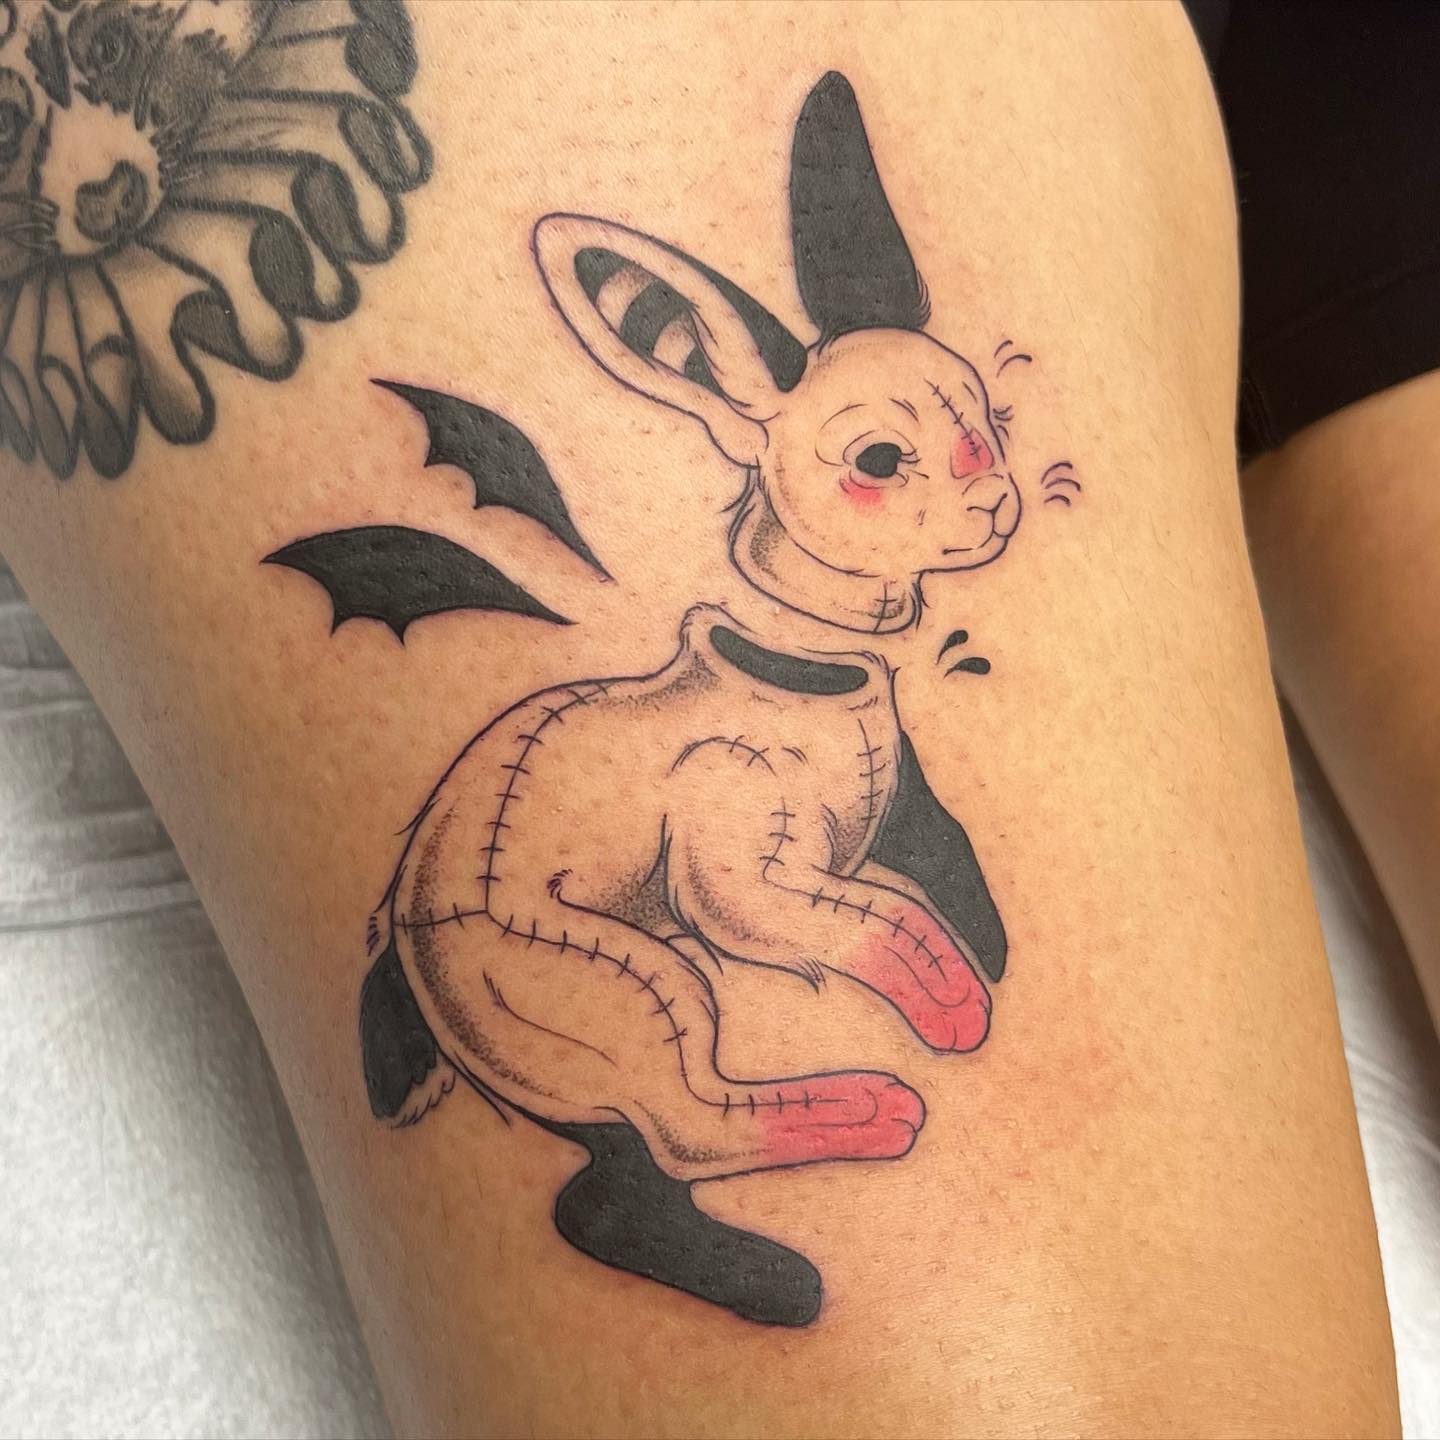 11 Playboy Bunny Tattoo Ideas You Have To See To Believe  alexie